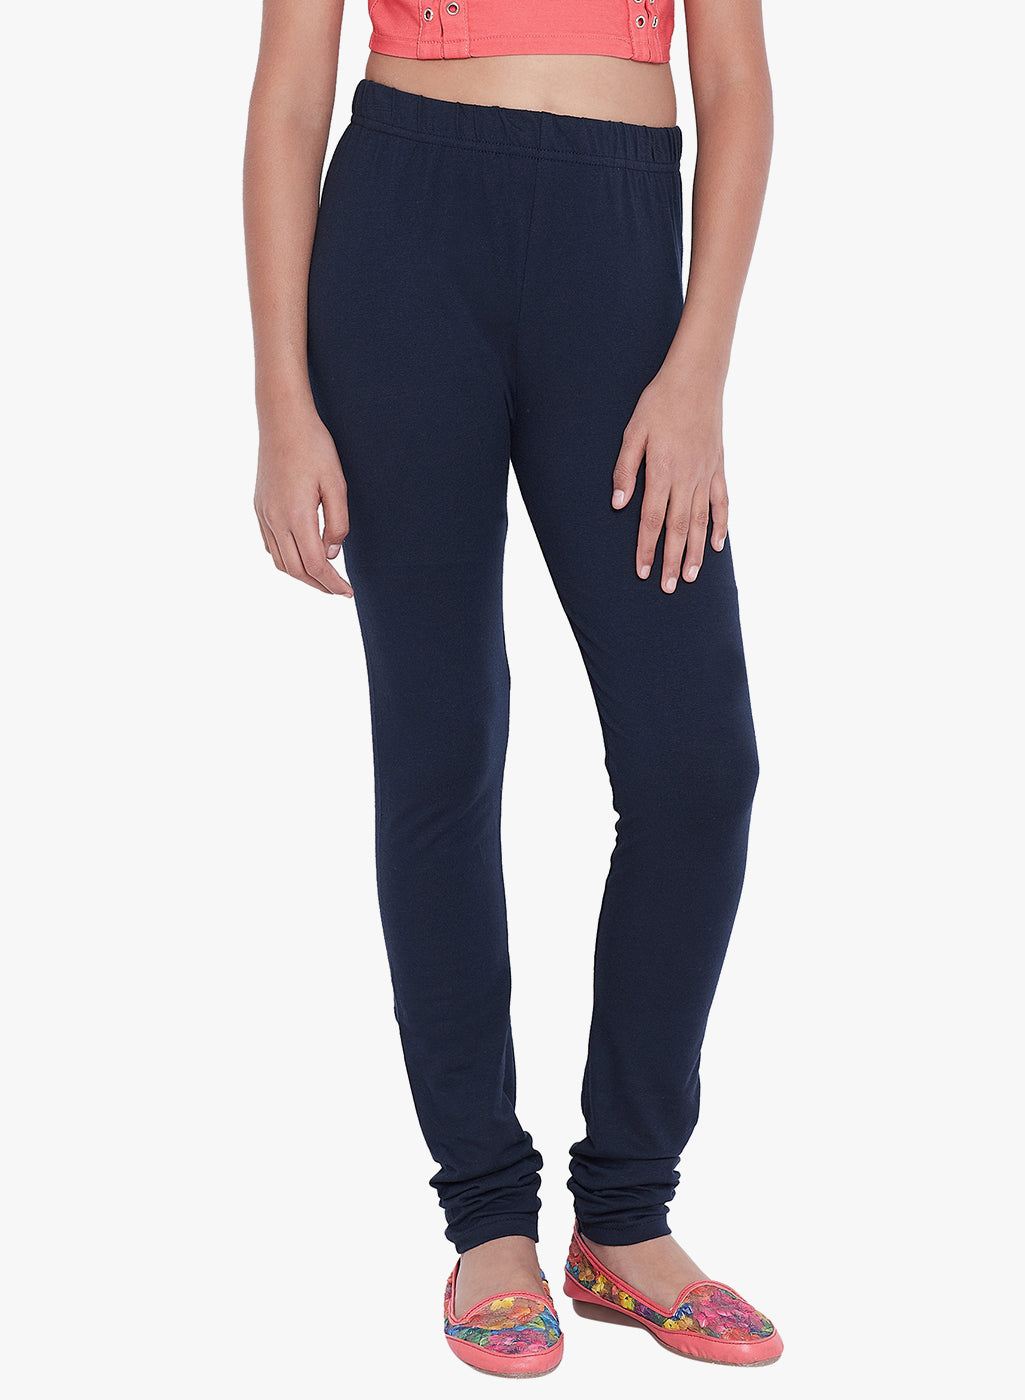 Denim & Co. Active Duo Stretch Leggings with Side Pocket - QVC.com